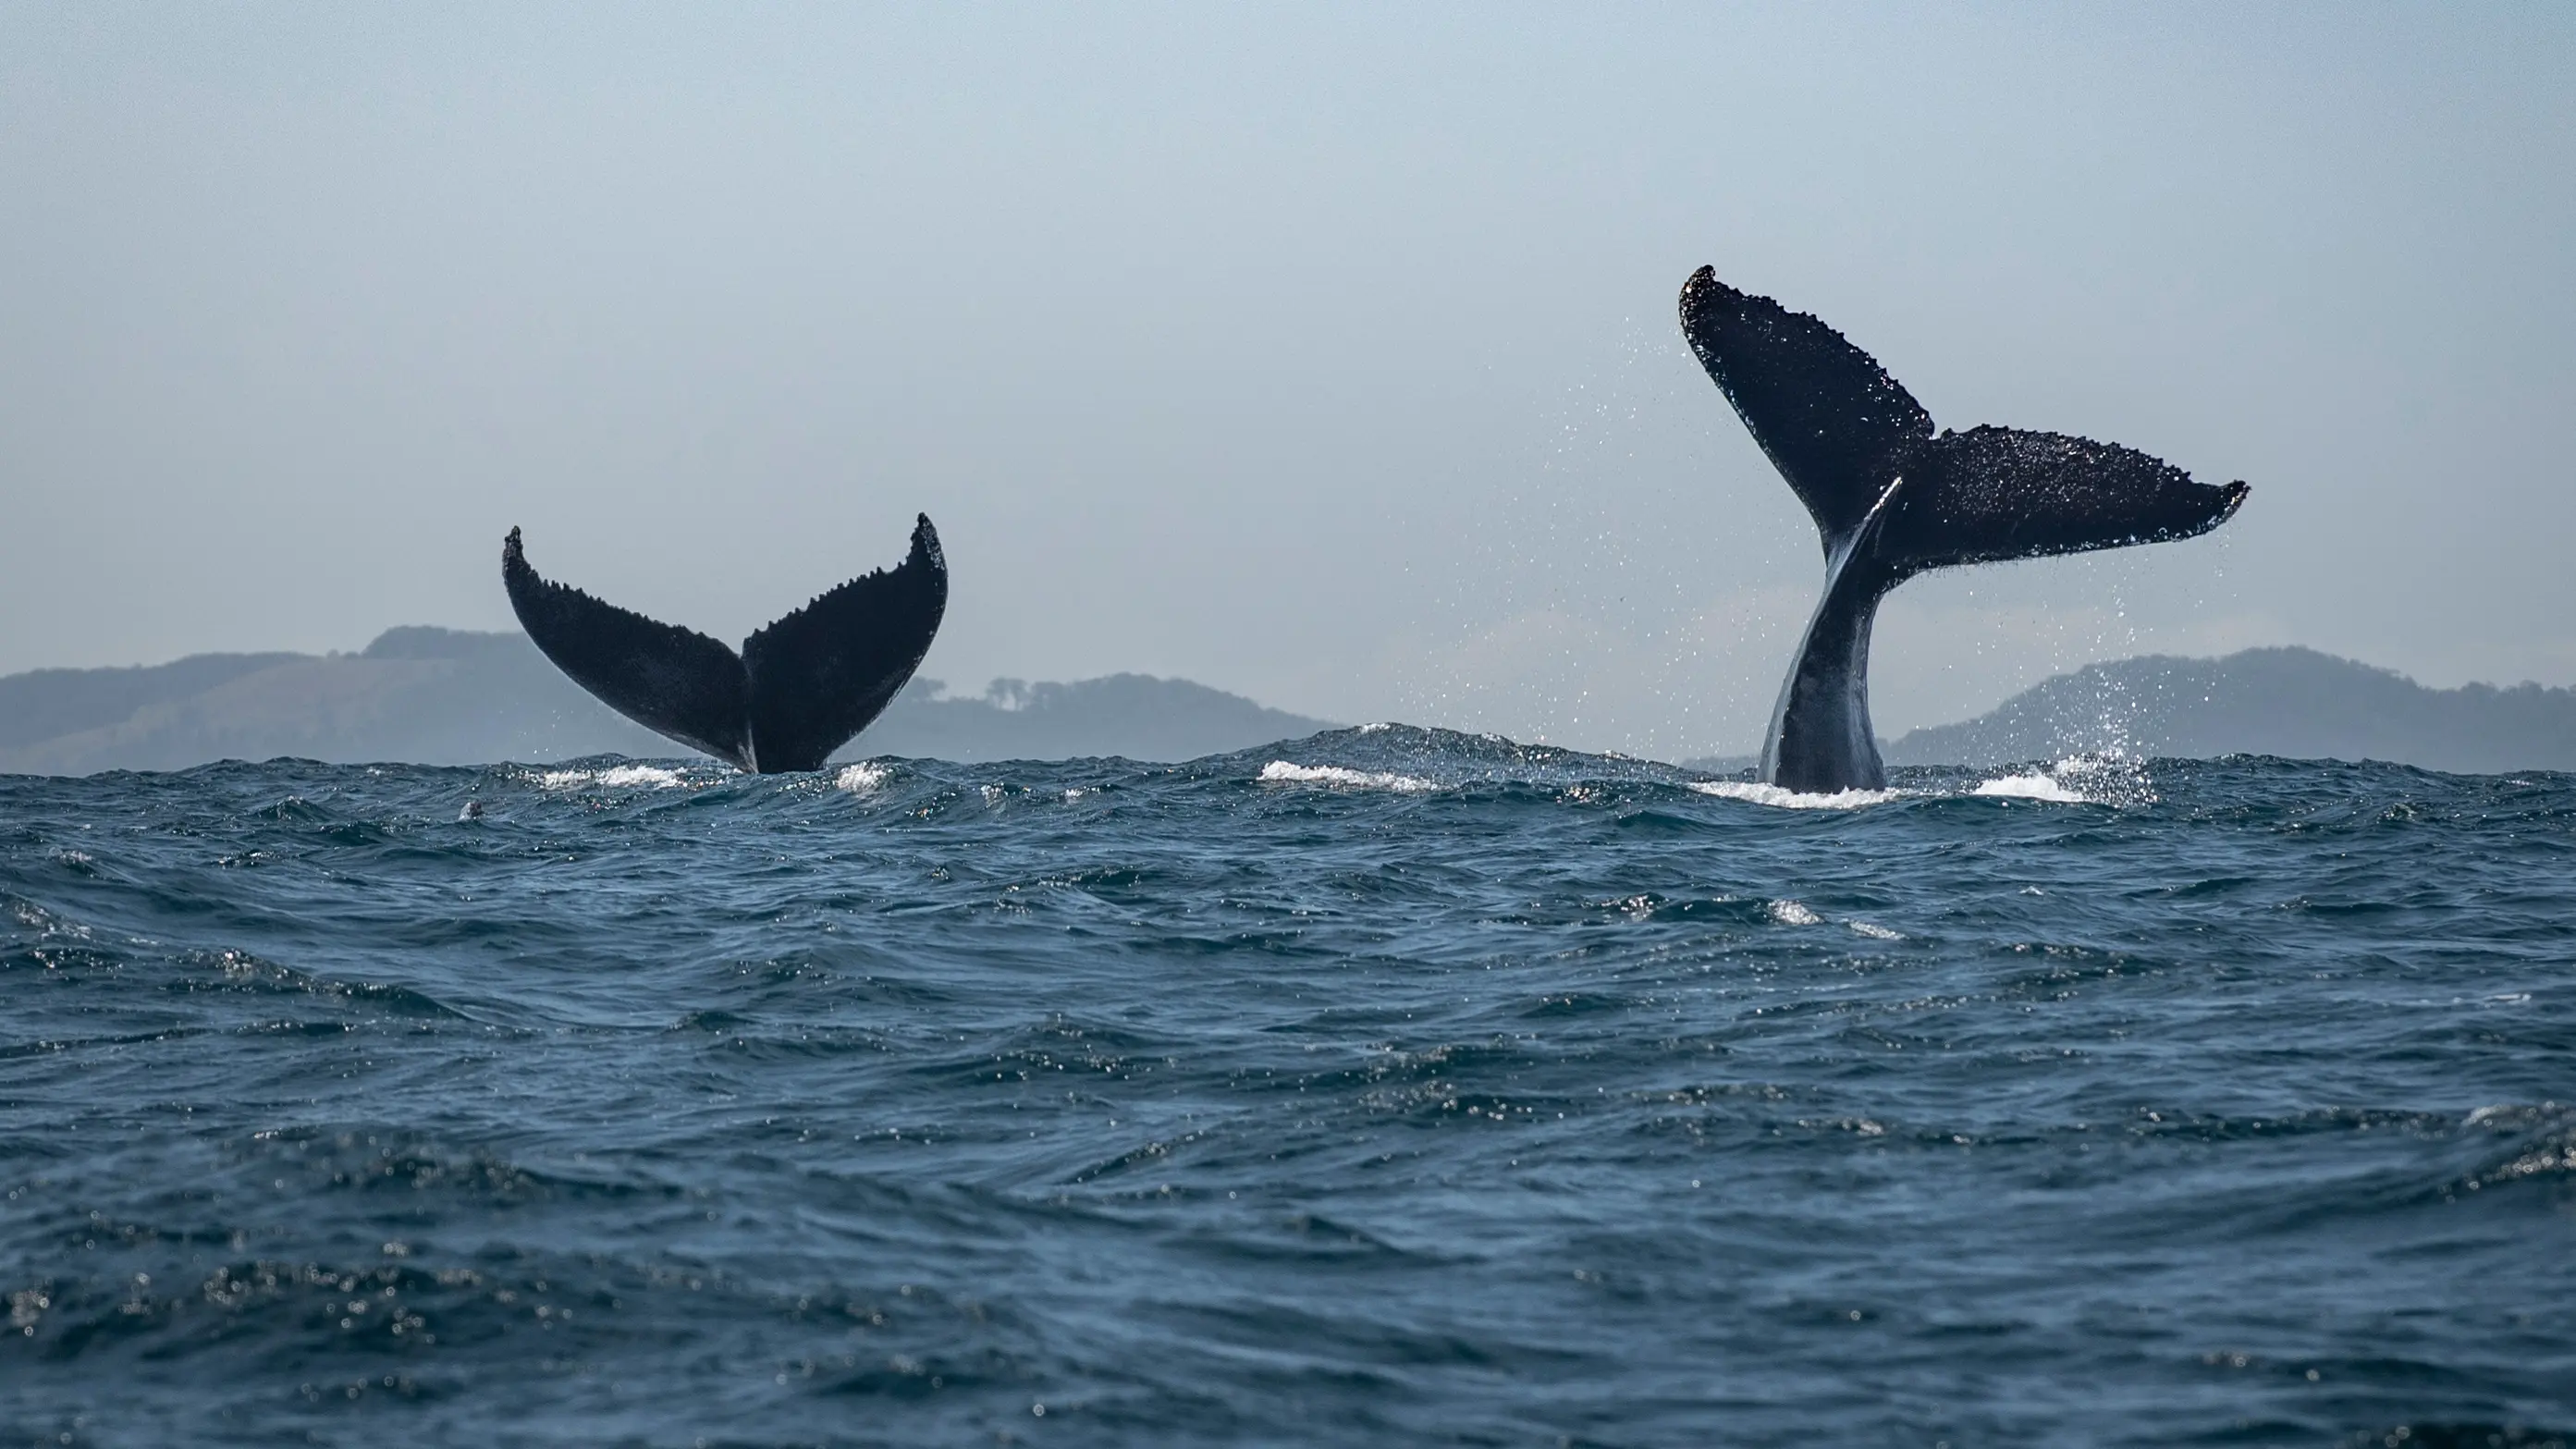 Two whale tails peaking out from the ocean at Cape Byron Marine Park. Image credit: stock.adobe.com